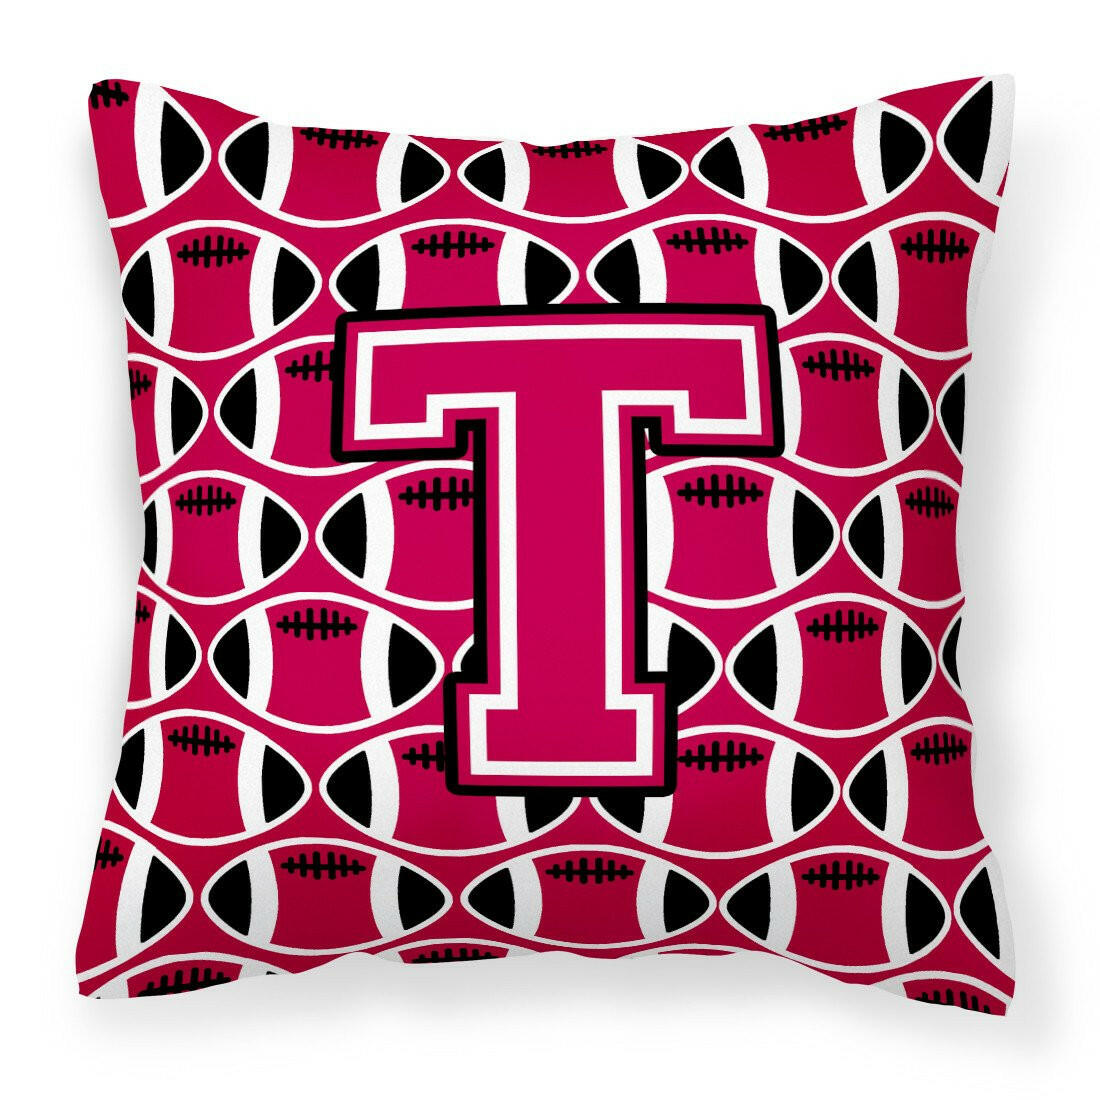 Letter T Football Crimson and White Fabric Decorative Pillow CJ1079-TPW1414 by Caroline's Treasures